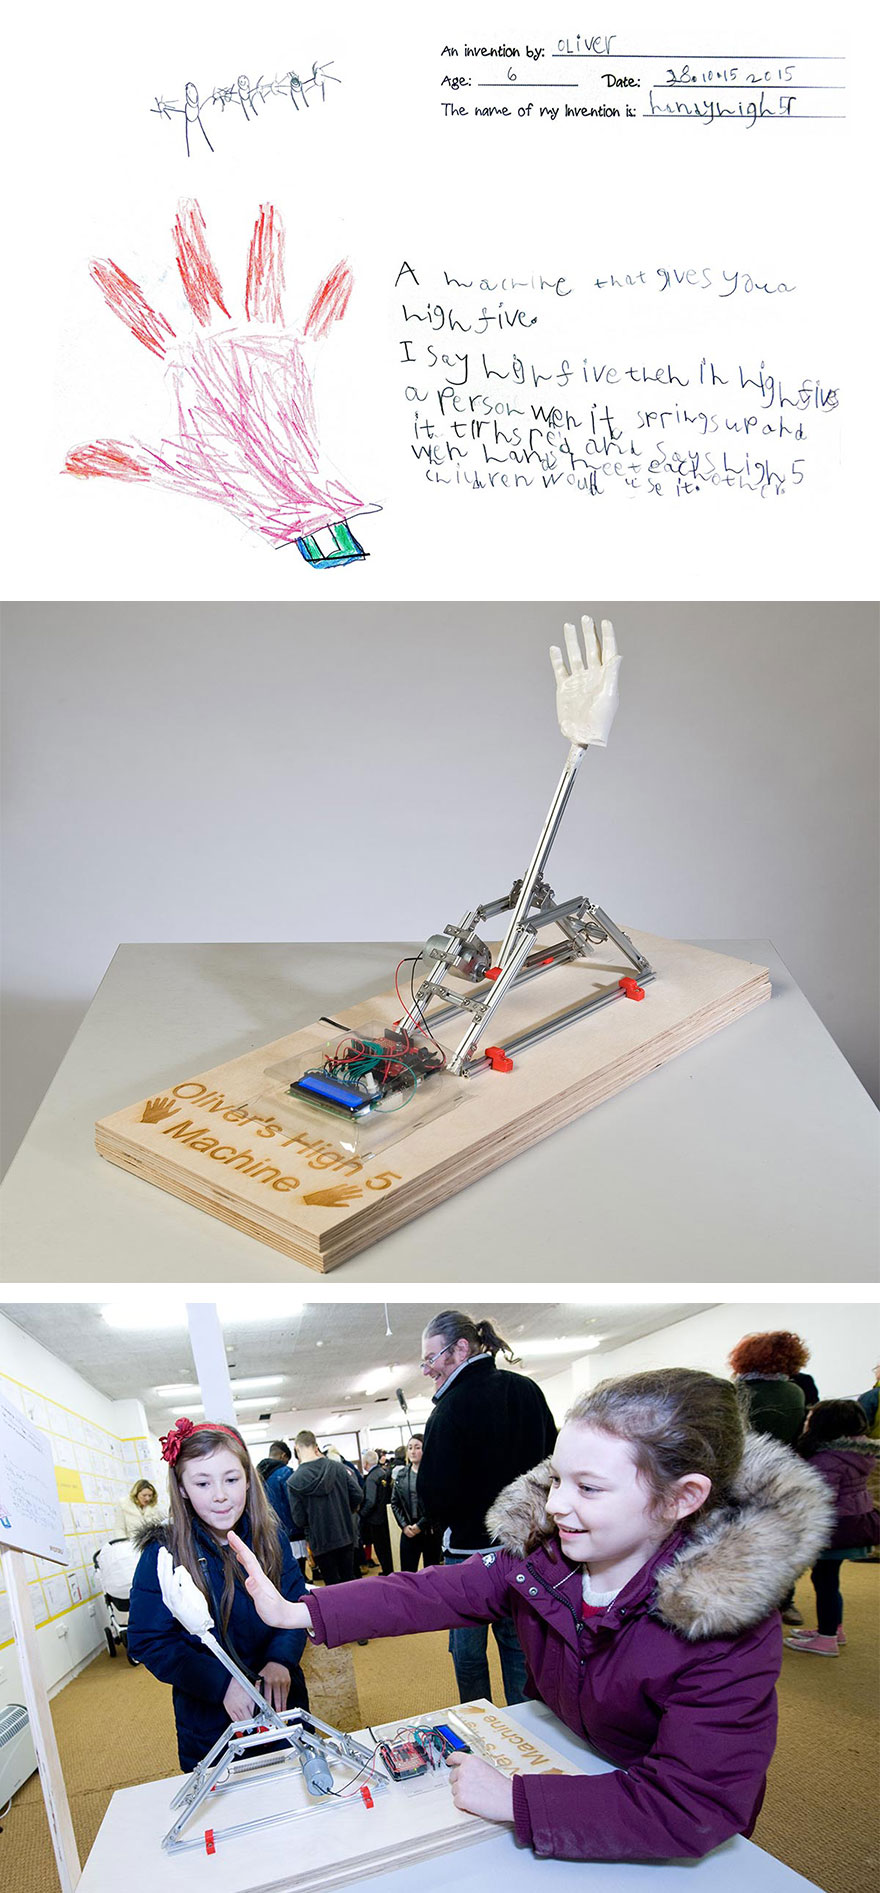 kids-inventions-turned-into-reality-inventors-project-dominic-wilcox-44__880